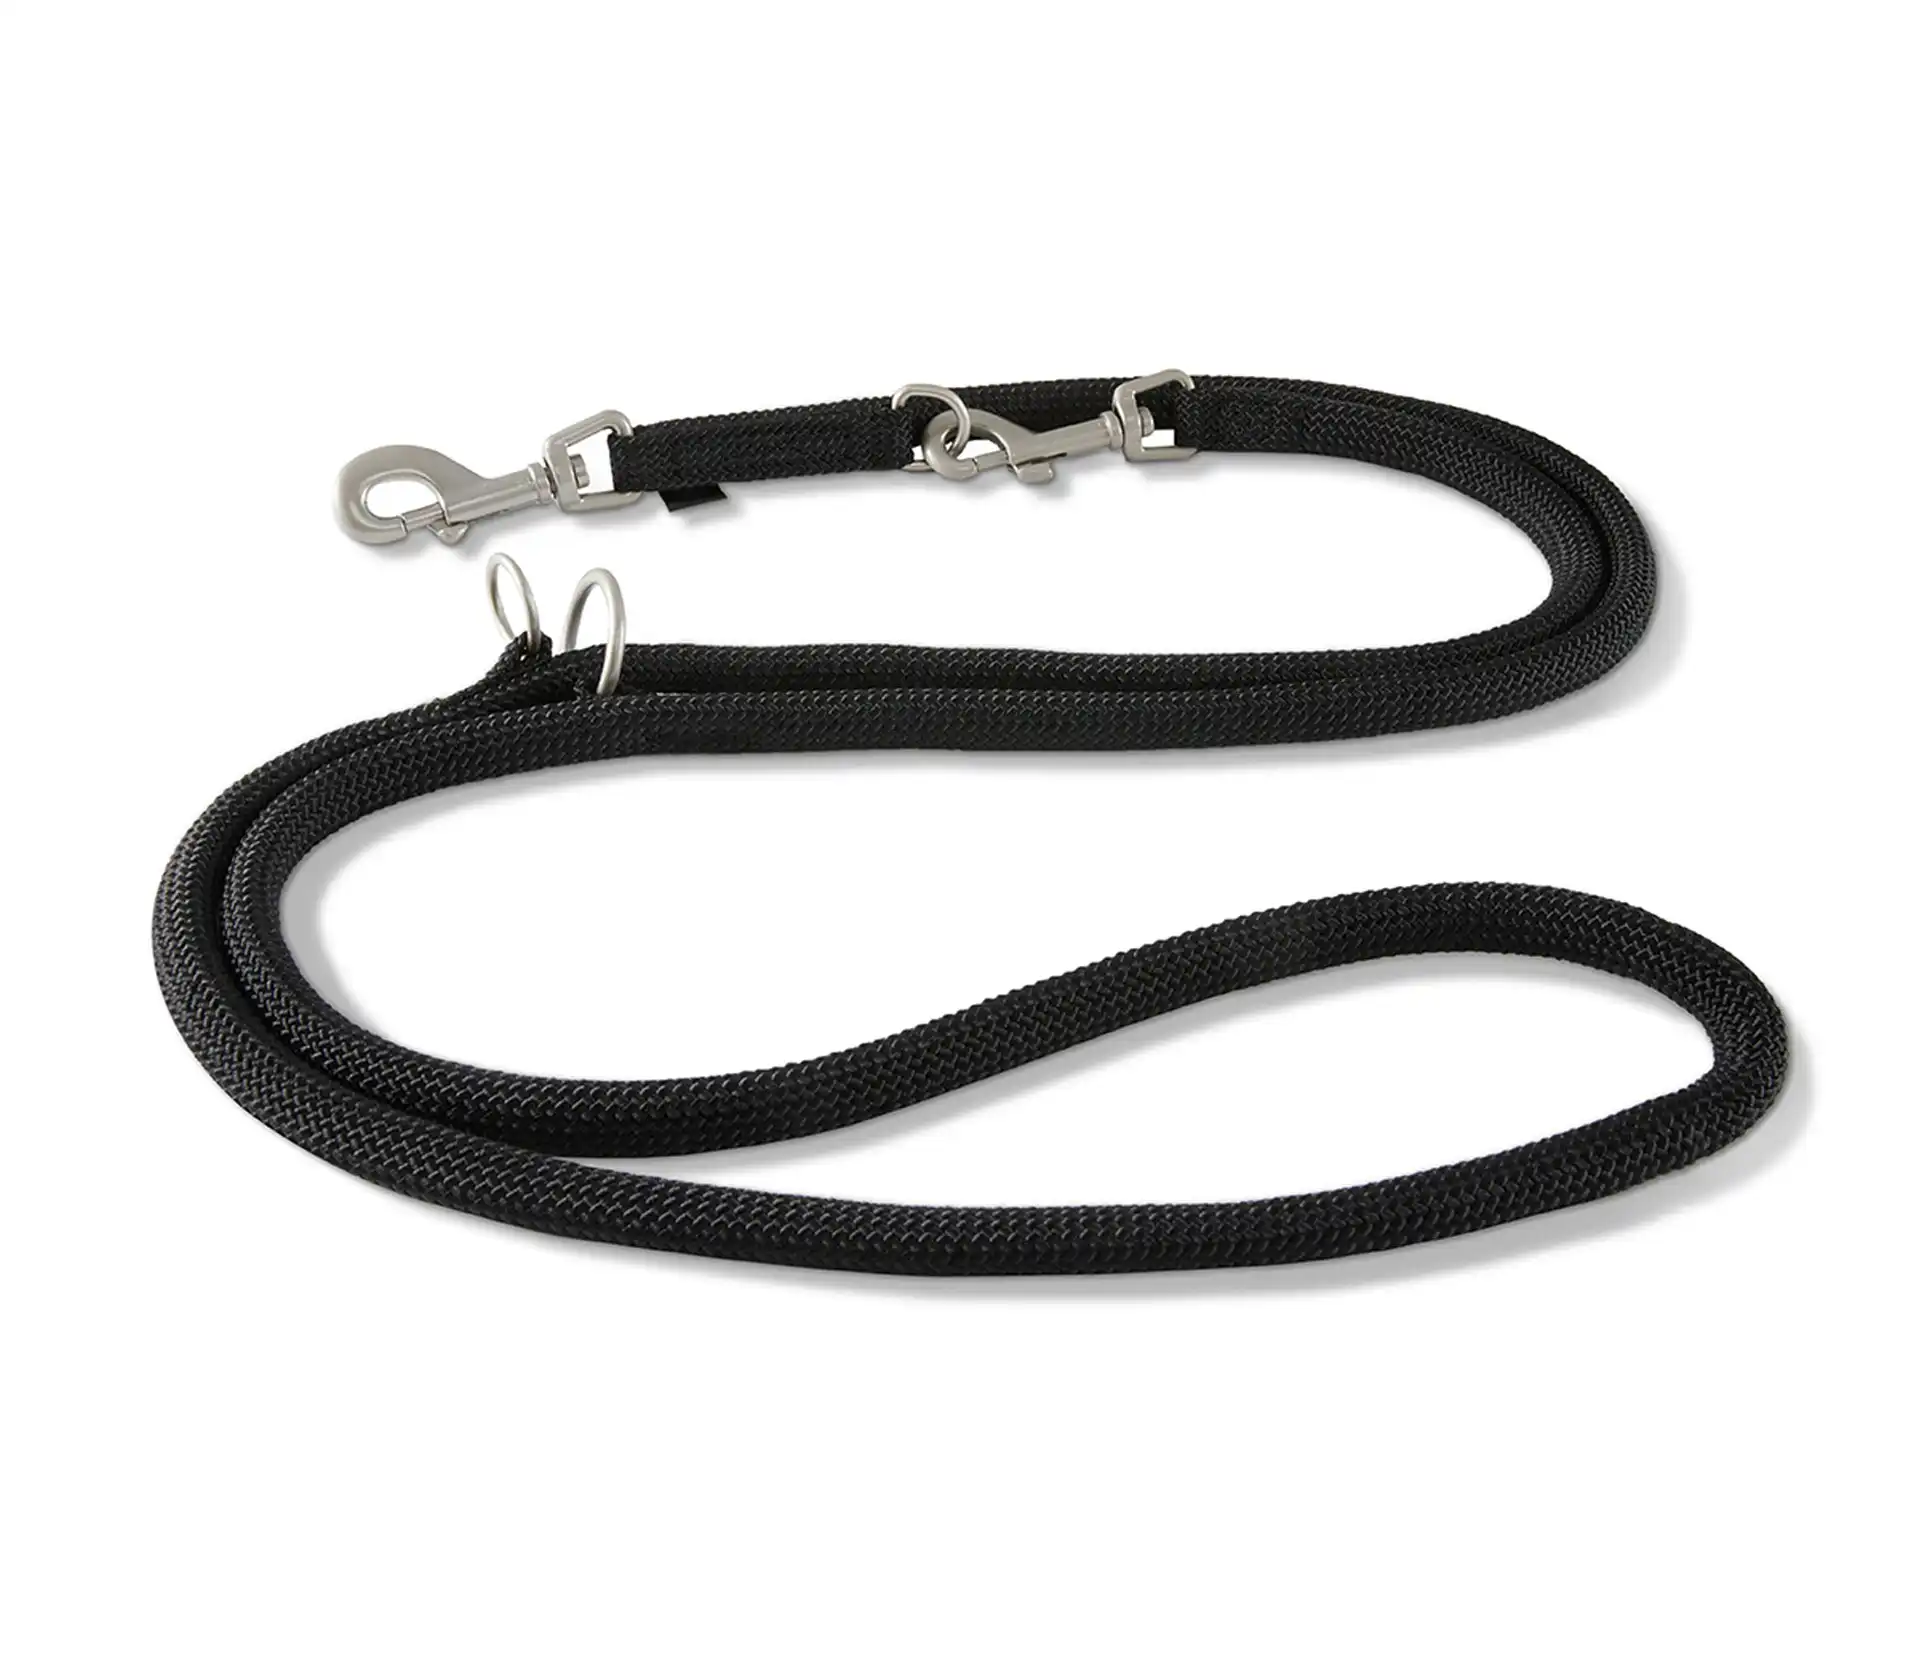 K2 Rope Programme Guide Leash